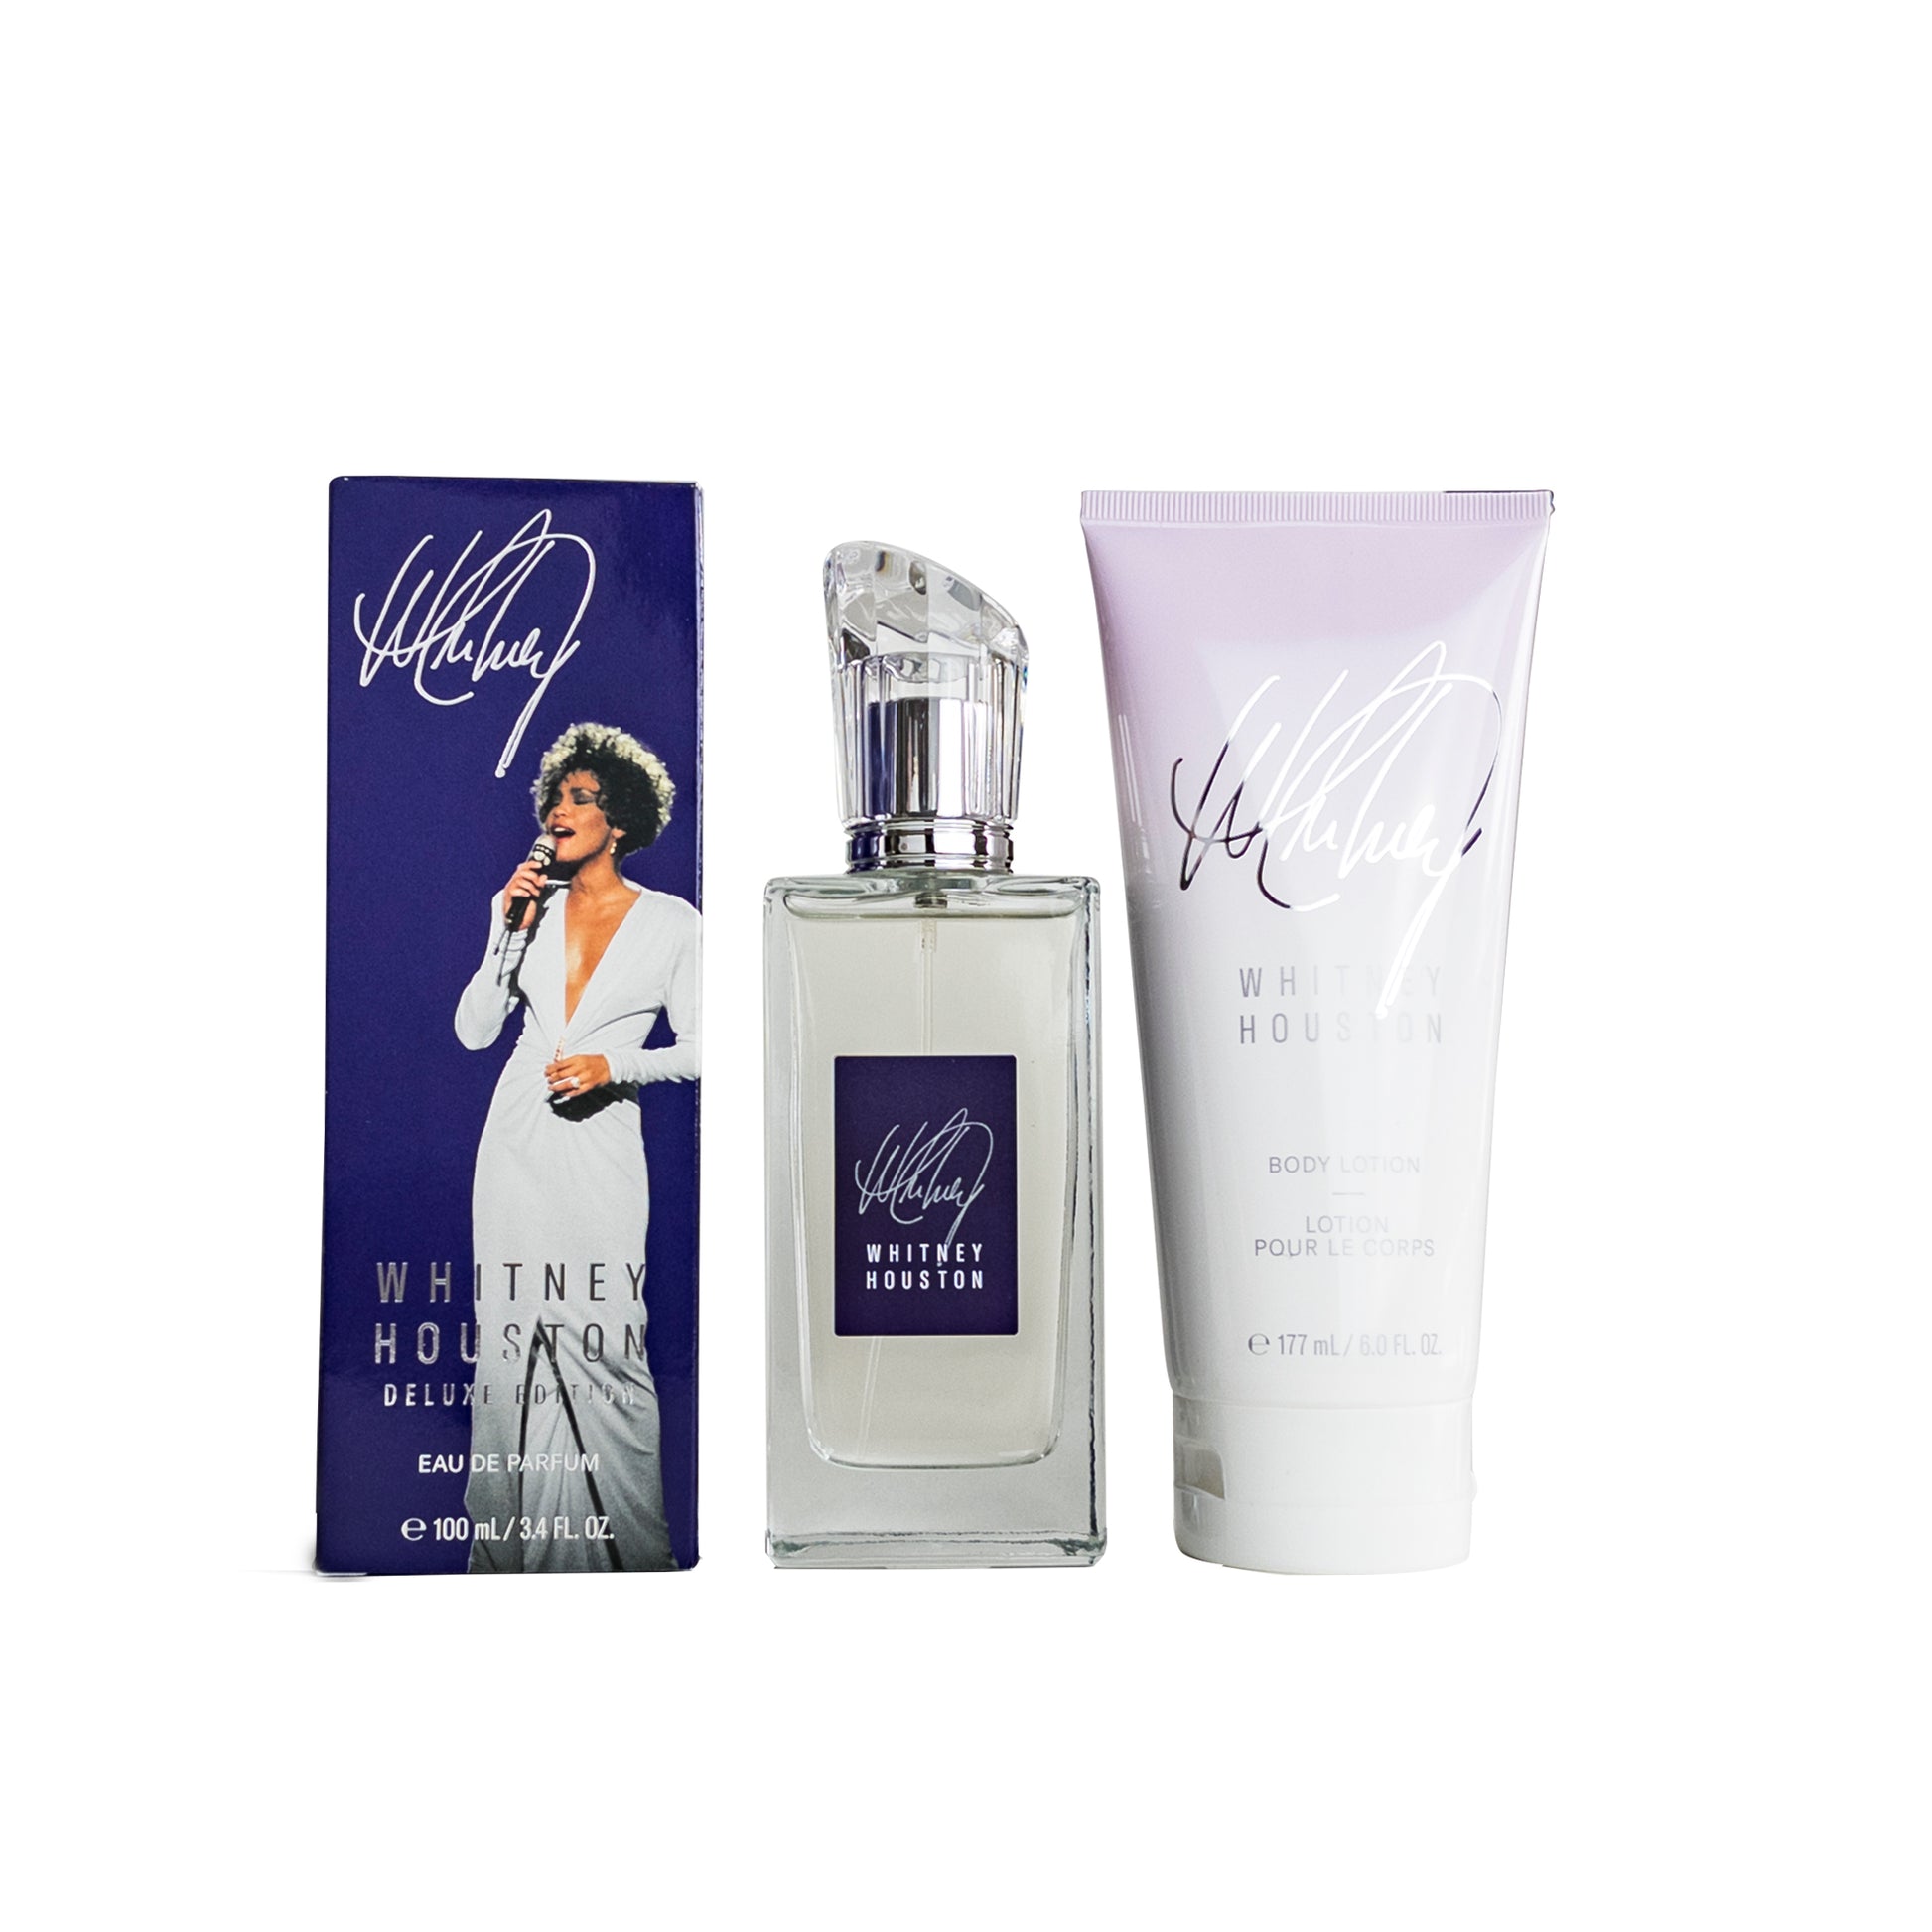 Whitney Gift Set EDP Spray and Body Lotion for Women by Whitney Houston 3.4 oz. Click to open in modal